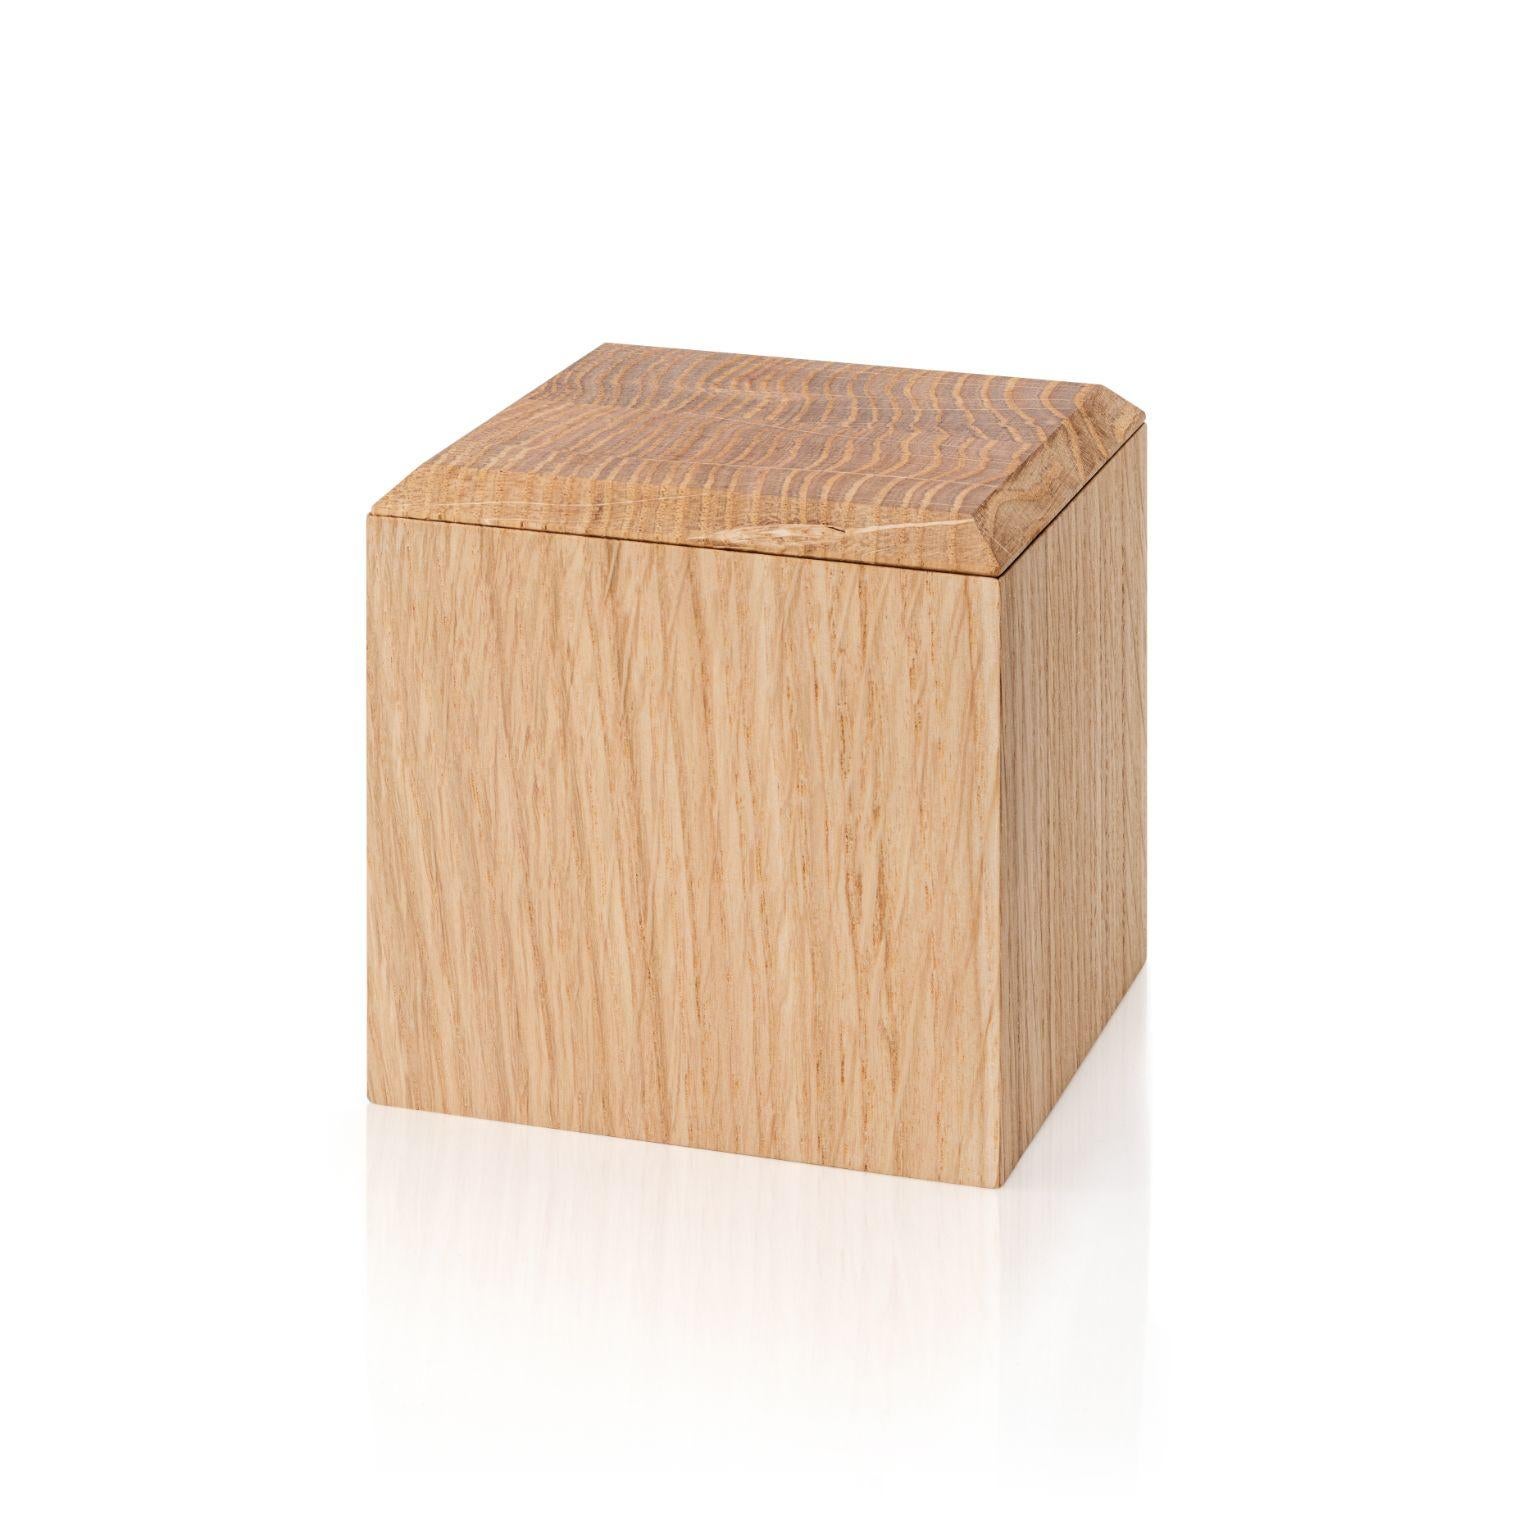 Pino boxes - Medium by Antrei Hartikainen
Materials: Oak, natural oil wax
Dimensions: D 9, W 9, H 5 / 9,5 / 14cm

A set of three vertical and two horizontal stacking boxes constructed of vividly grained woods. The pino boxes may be arranged in